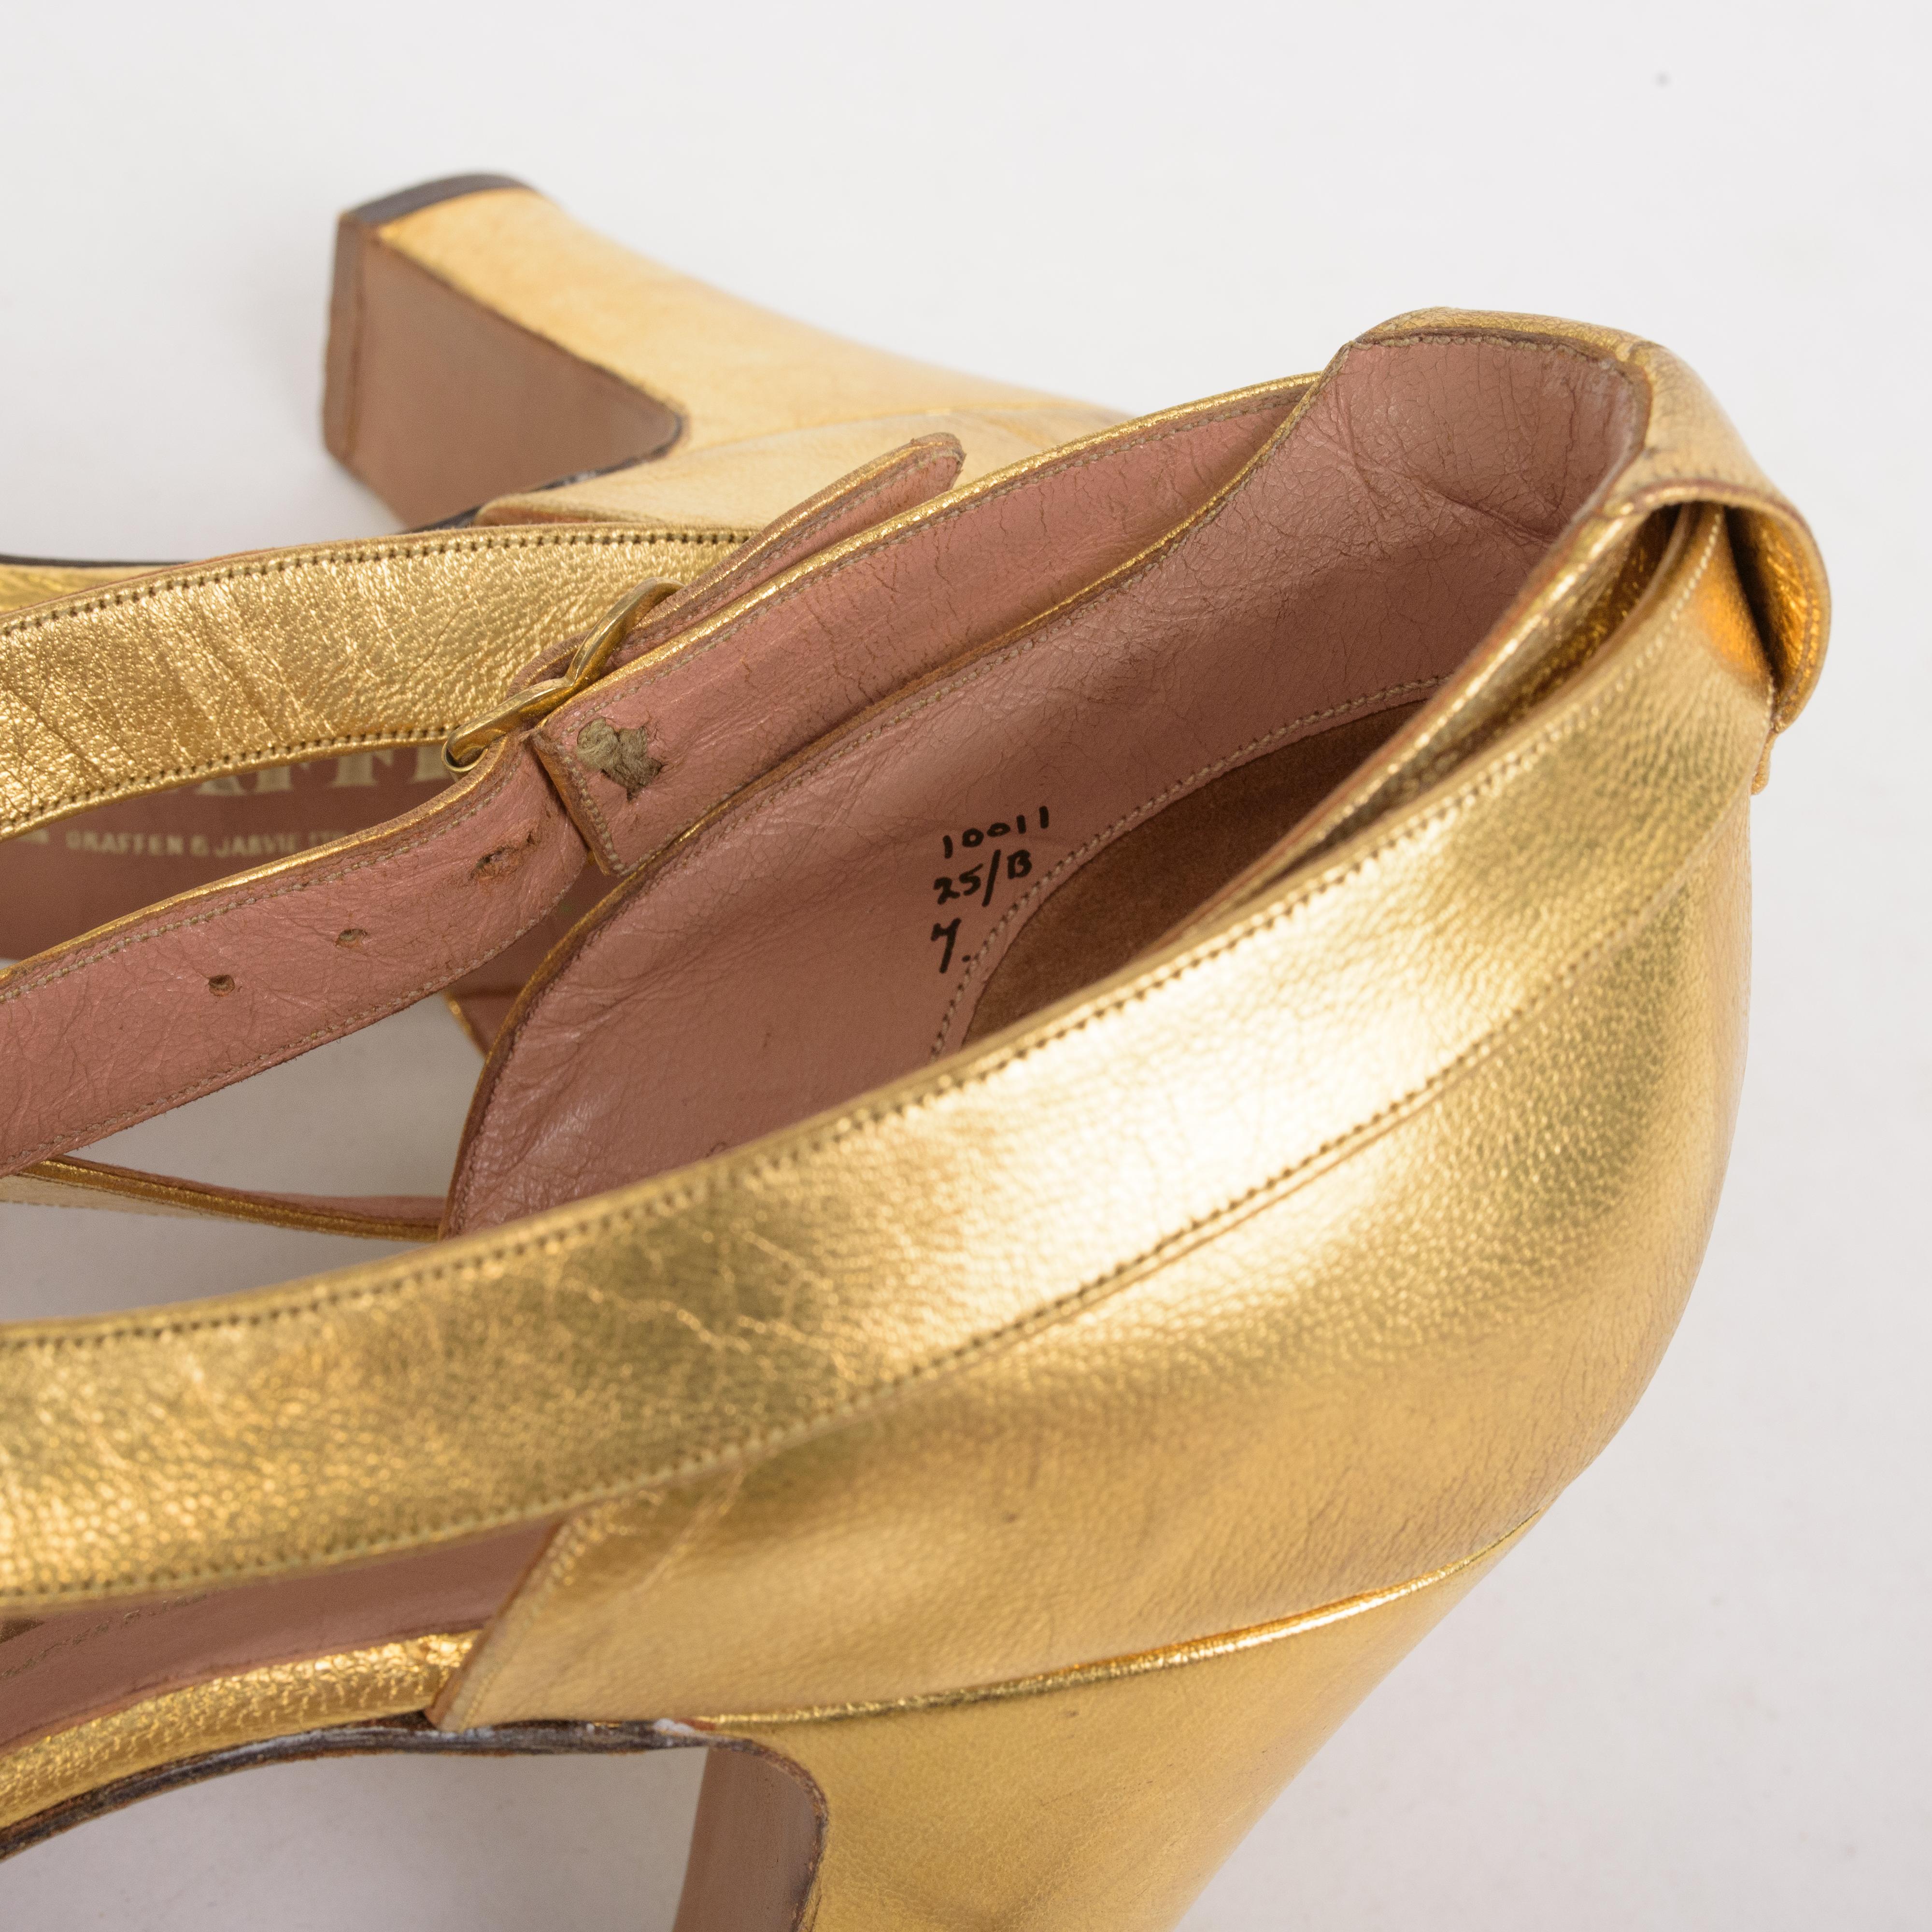 Pairs of ballroom shoes - Salomés in golden leather Circa 1930/1940 1